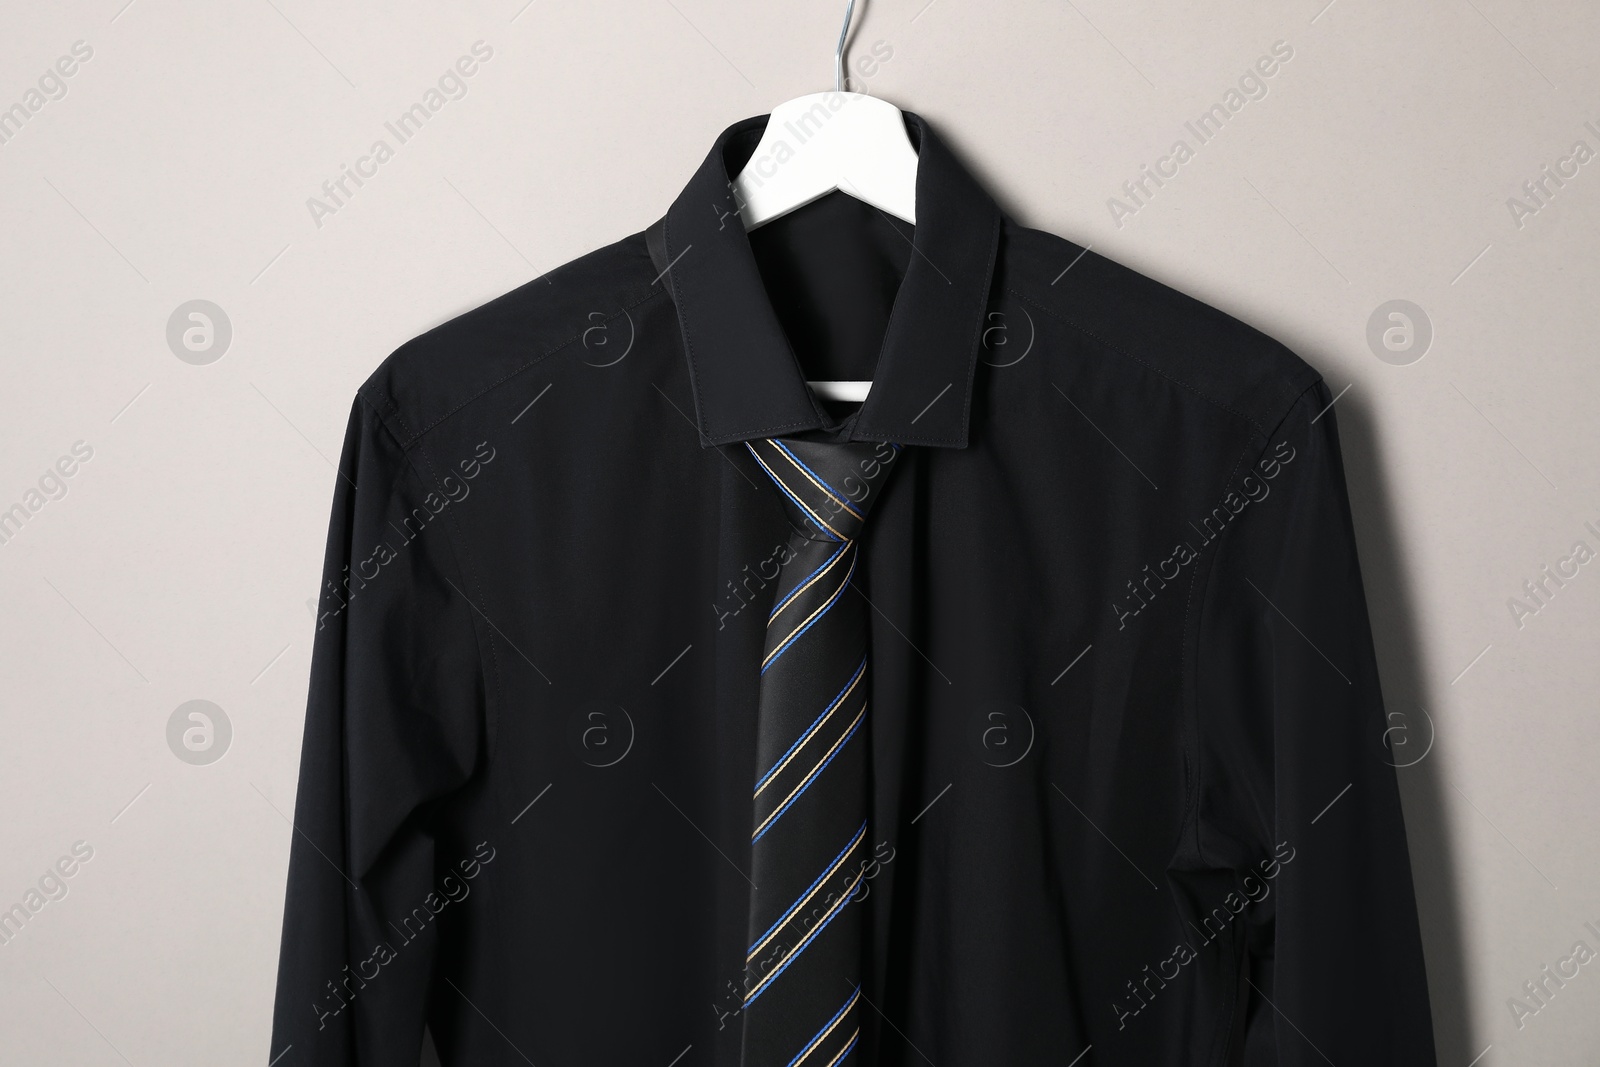 Photo of Hanger with shirt and striped necktie on light background